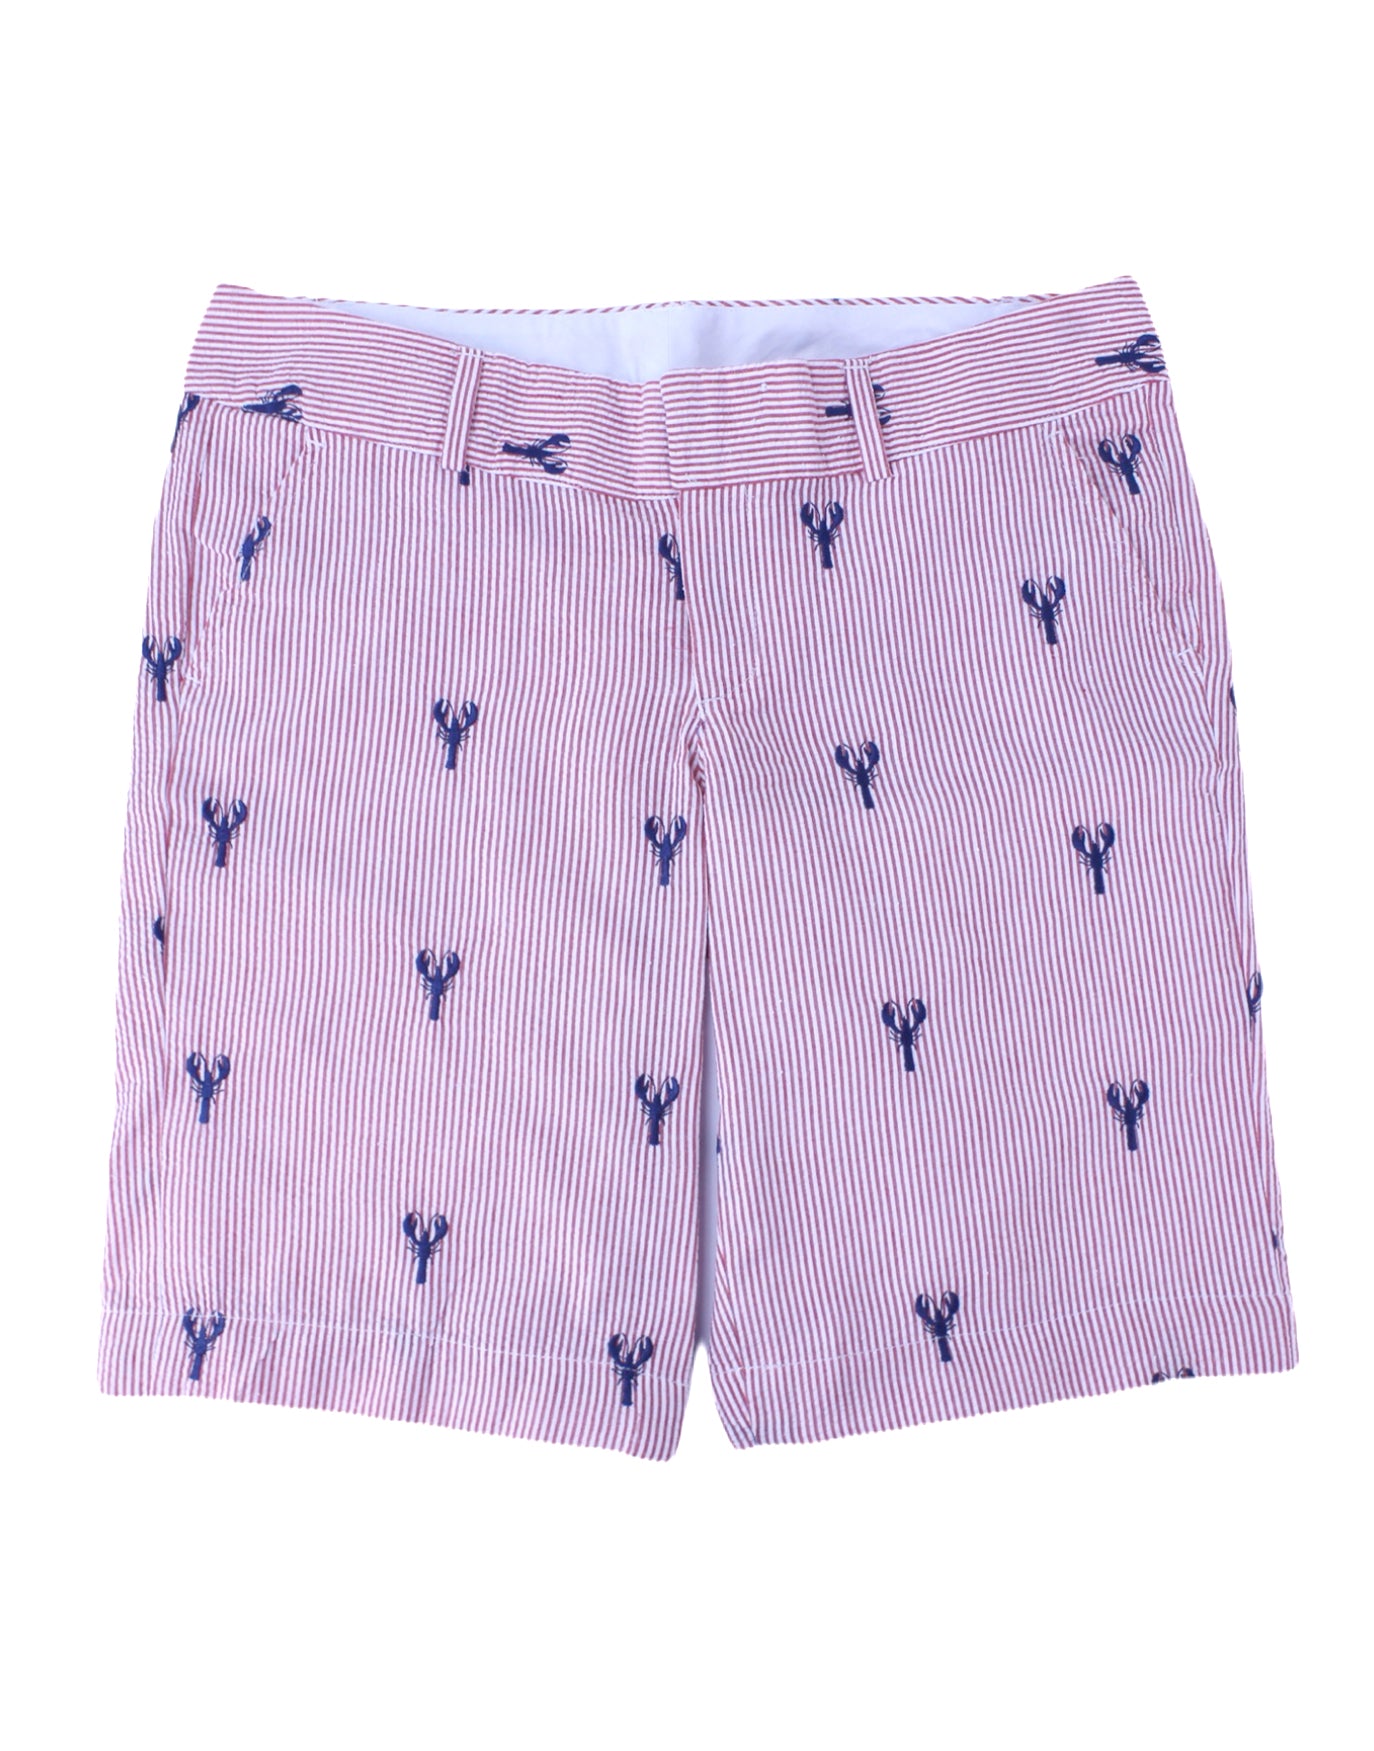 Red Seersucker Women's Bermuda Shorts with Navy Embroidered Lobsters